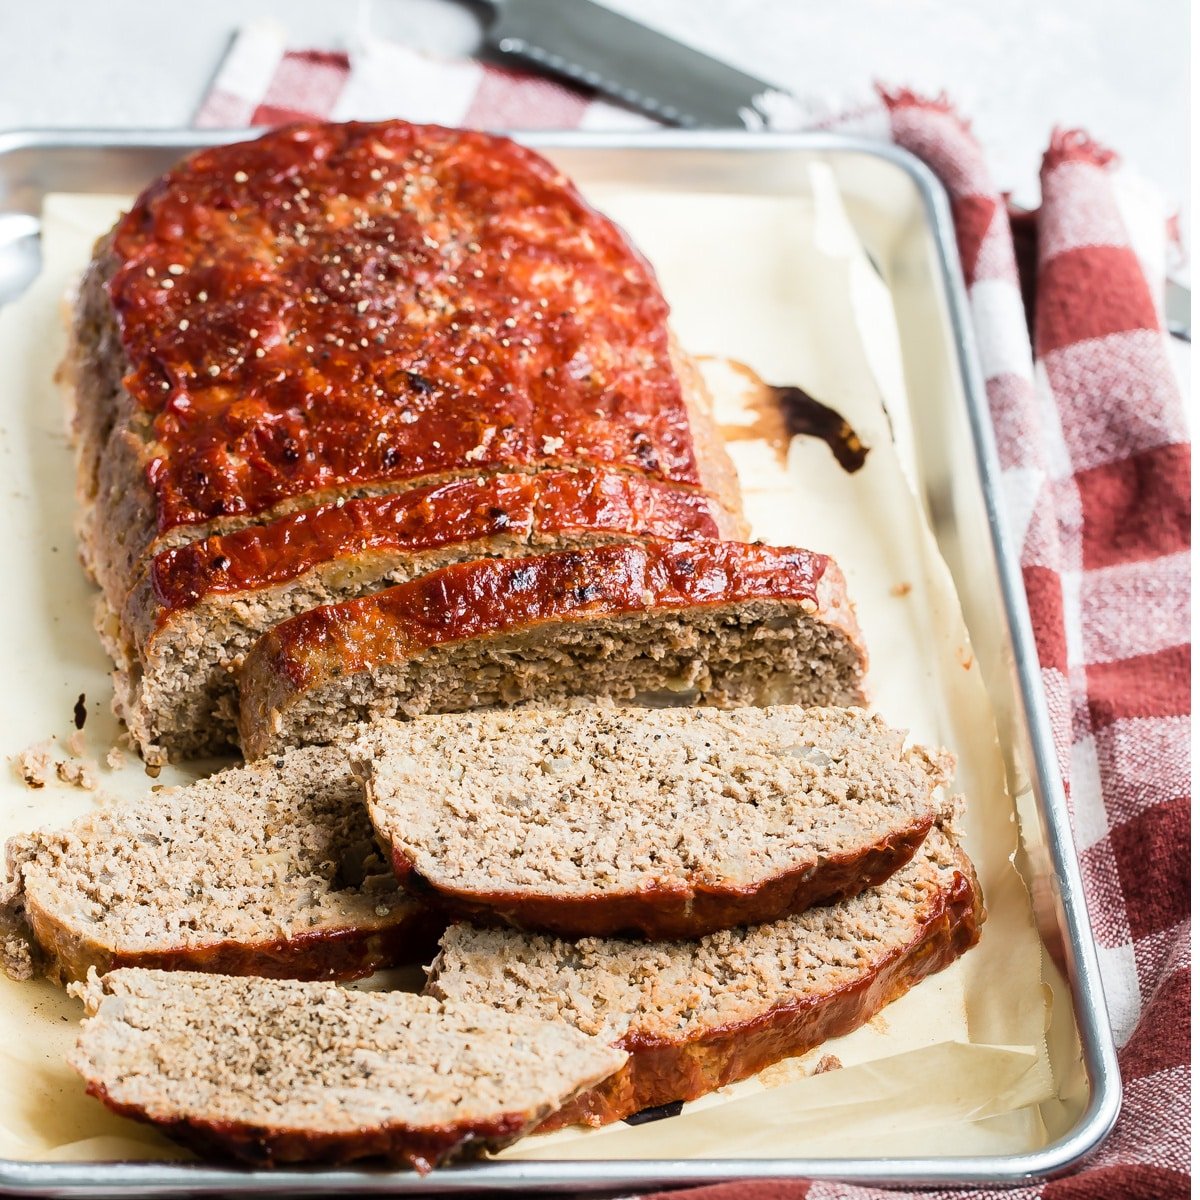 How Long To Bake 1 Lb Meatloaf At 325